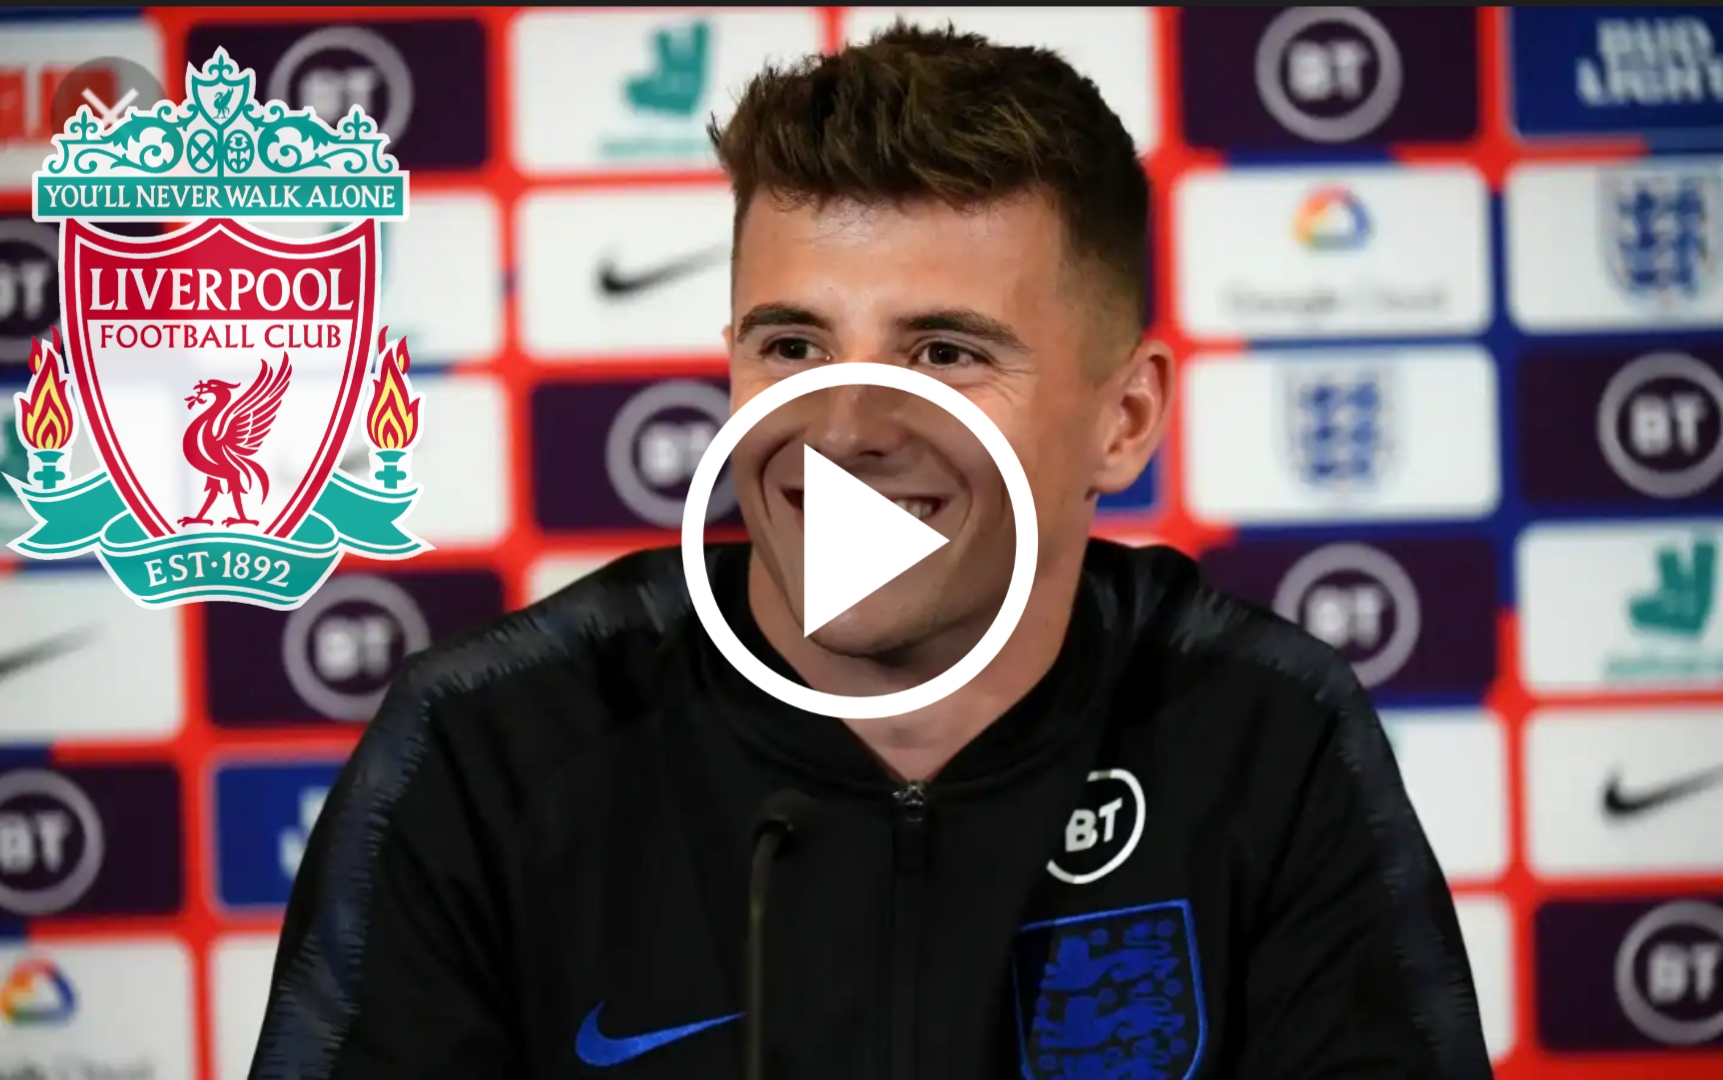 "I knew I was coming here" - watch Mason Mount makes Anfield claim, amid reports Liverpool want to sign him 1 Sportelo